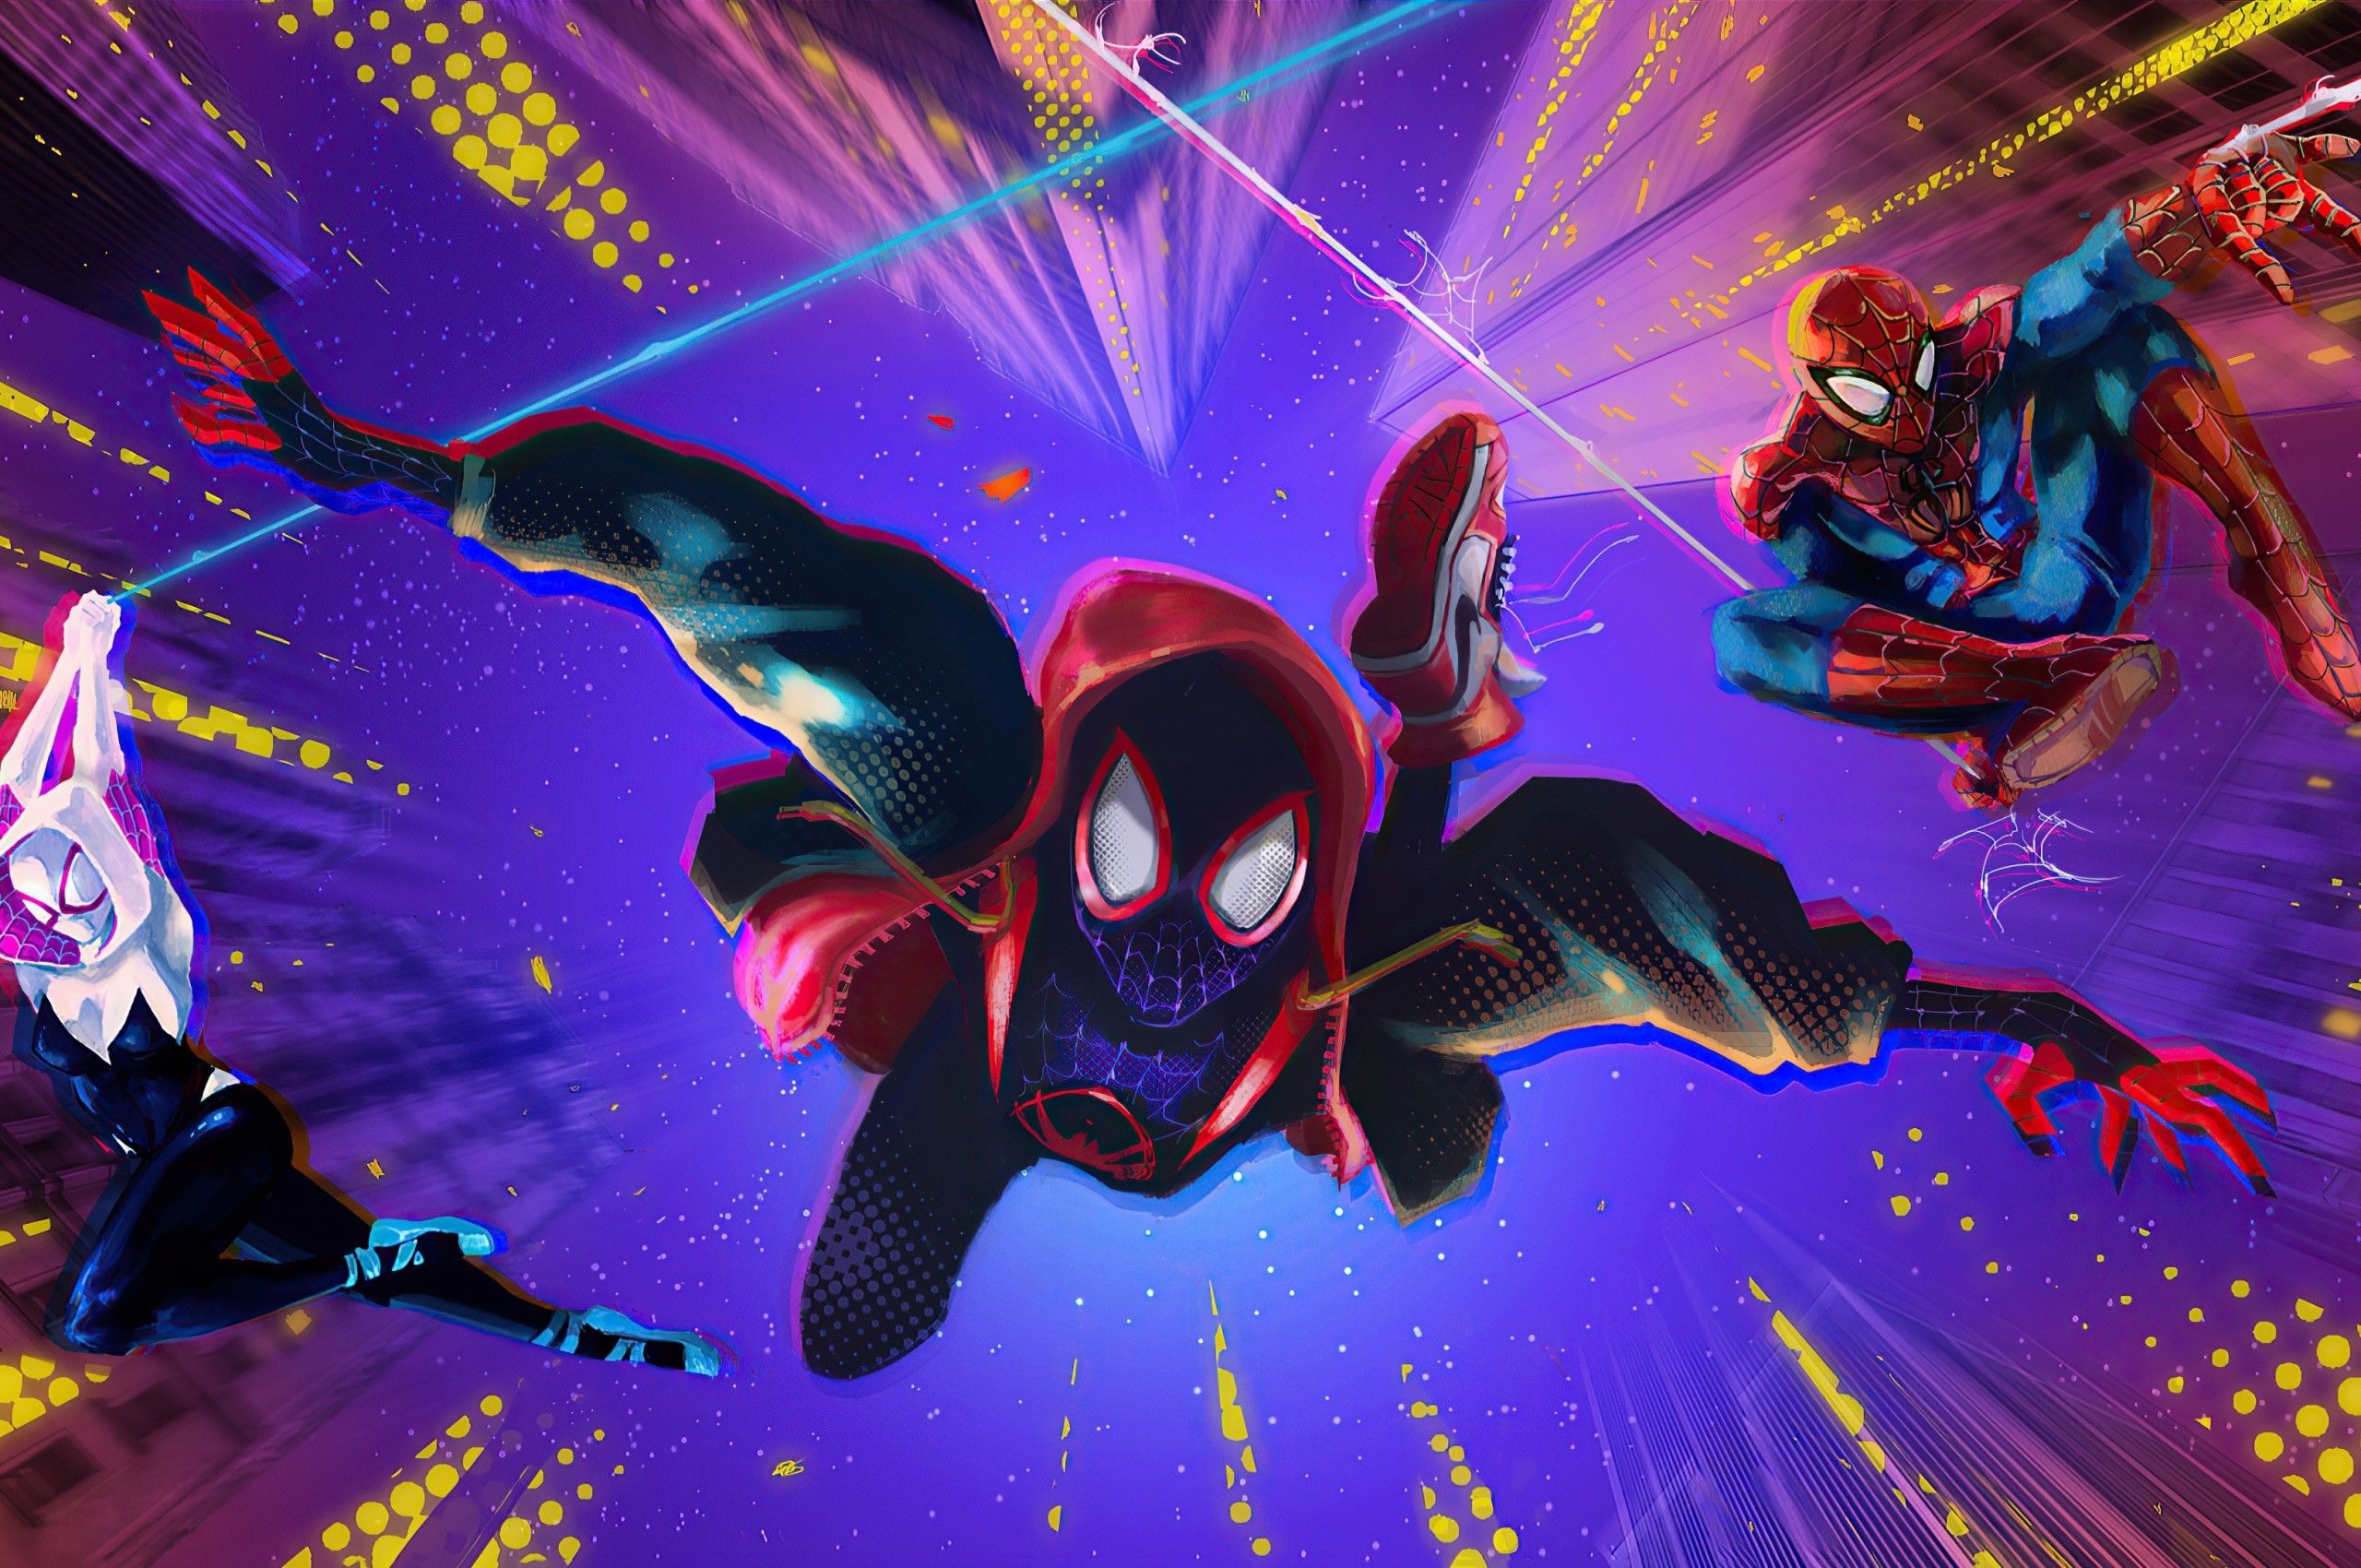 Download 2560x1700 Spider Man: Into The Spider Verse, Miles Morales, Jumping, Falling Down, Animation Wallpaper For Chromebook Pixel